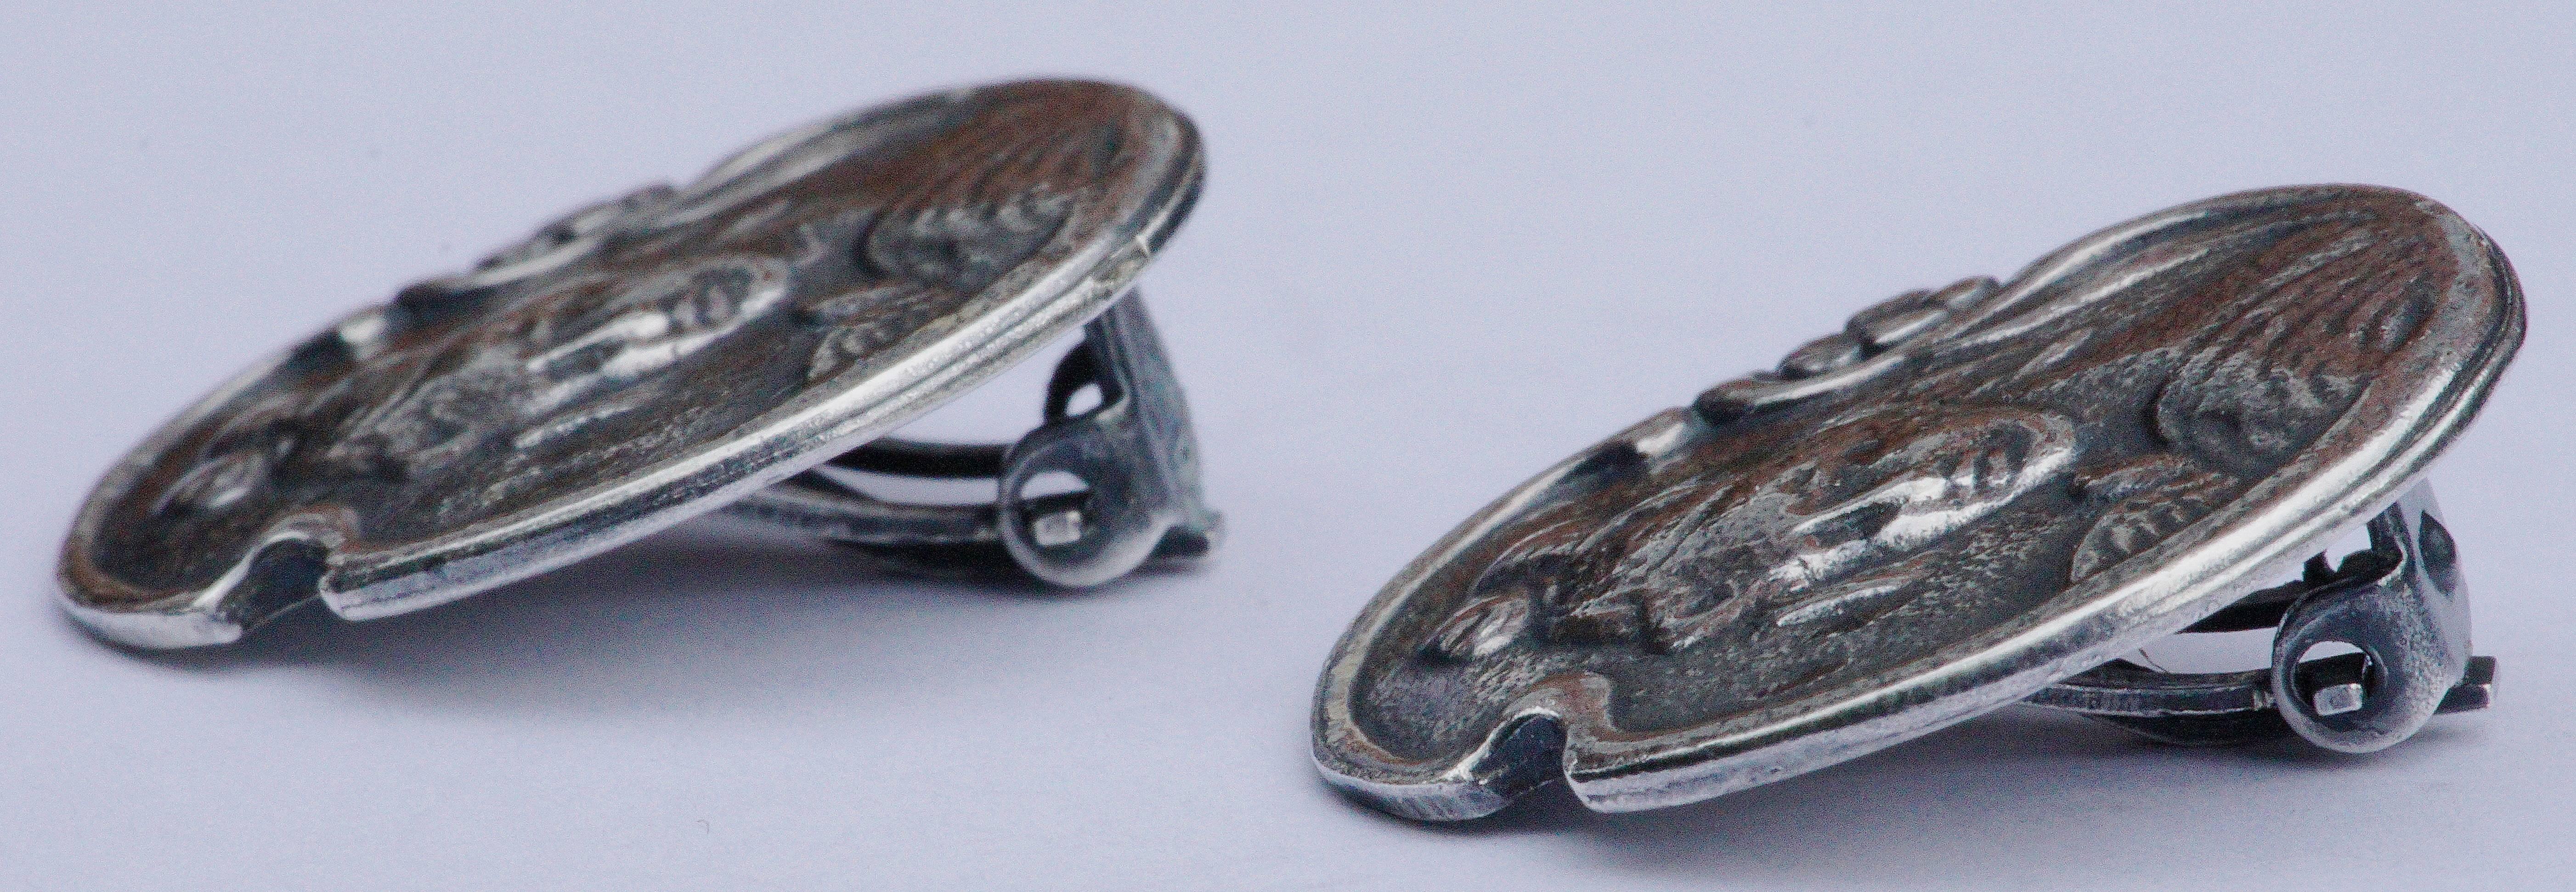 Original early twentieth century art nouveau silver clip earrings, measuring 2.3cm, .9 inch diameter. They are unmarked, but test as silver.

They have a wonderful lady and flower design. Art nouveau vintage earrings such as these are hard to find.
